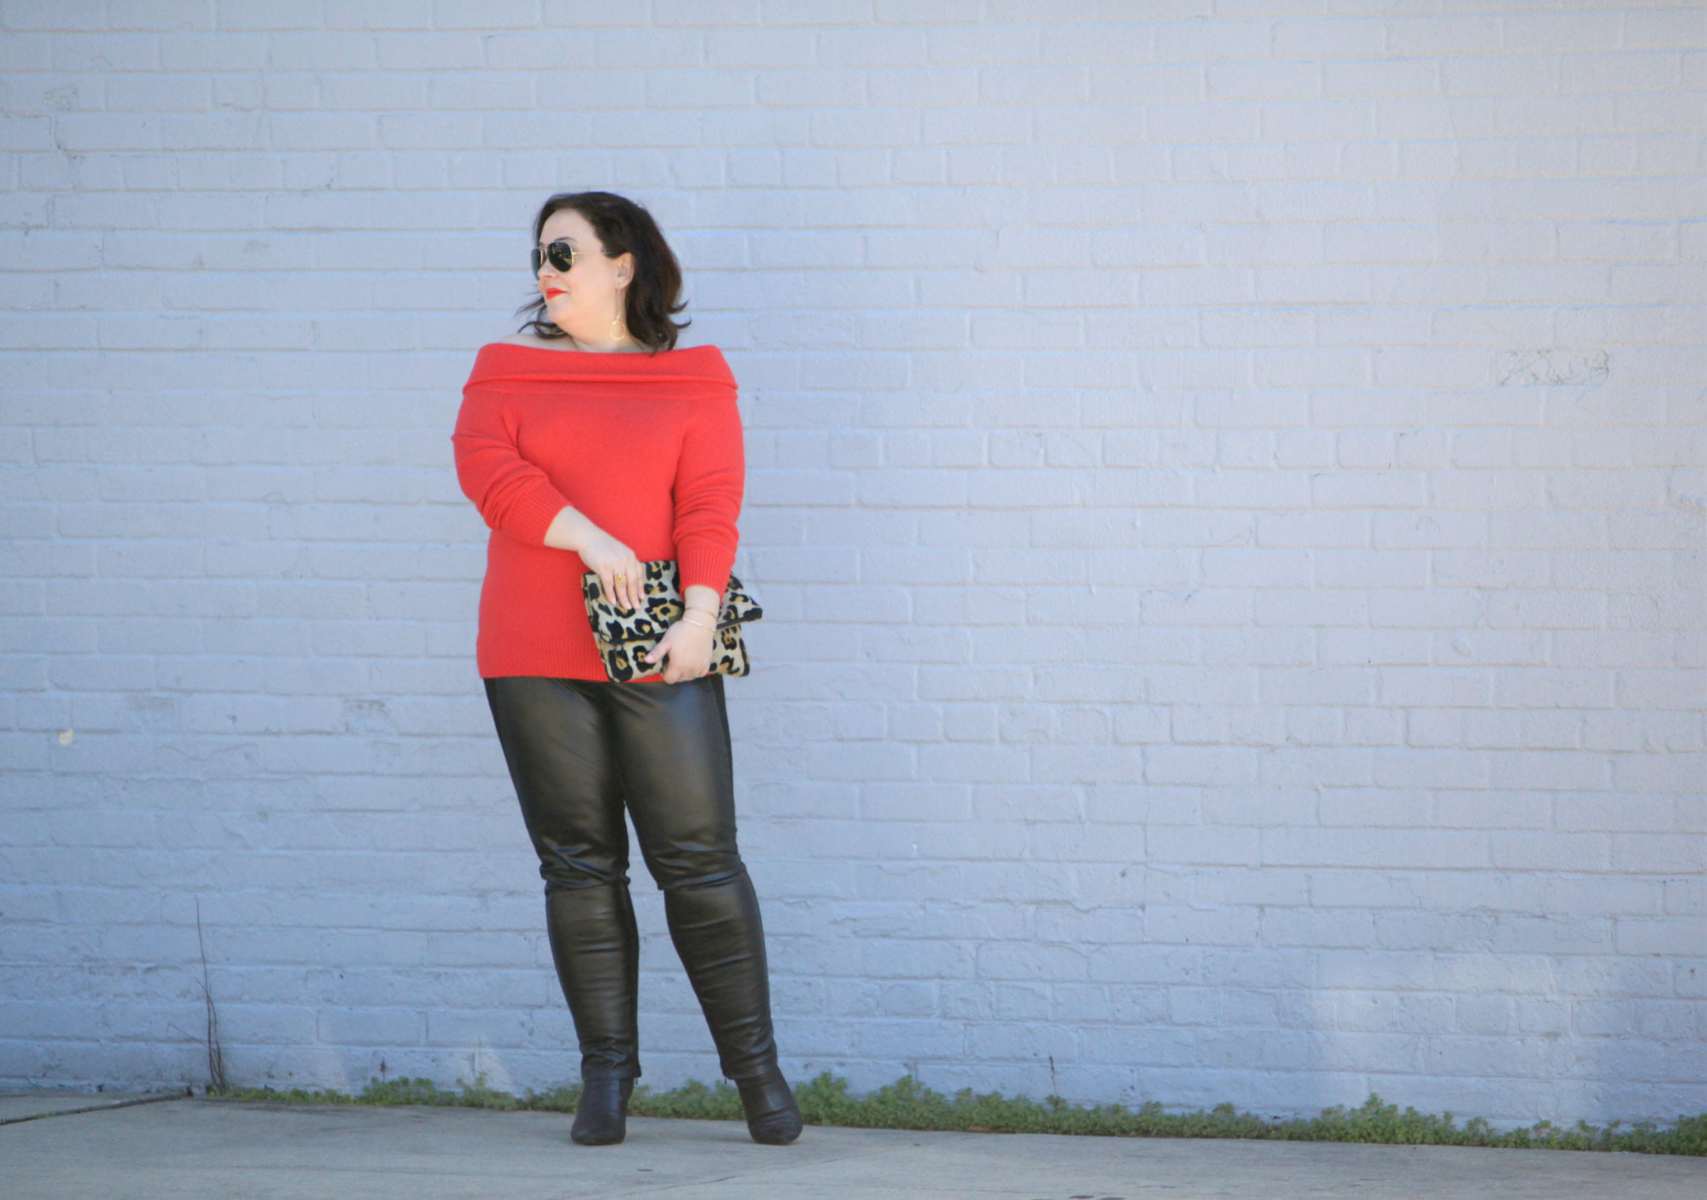 Wardrobe Oxygen, over 40 size 14 fashion blogger in a Vince Camuto sweater from Gwynnie Bee styled with Stella Carakasi faux leather front ponte pants and a leopard clutch from Love,Cortnie